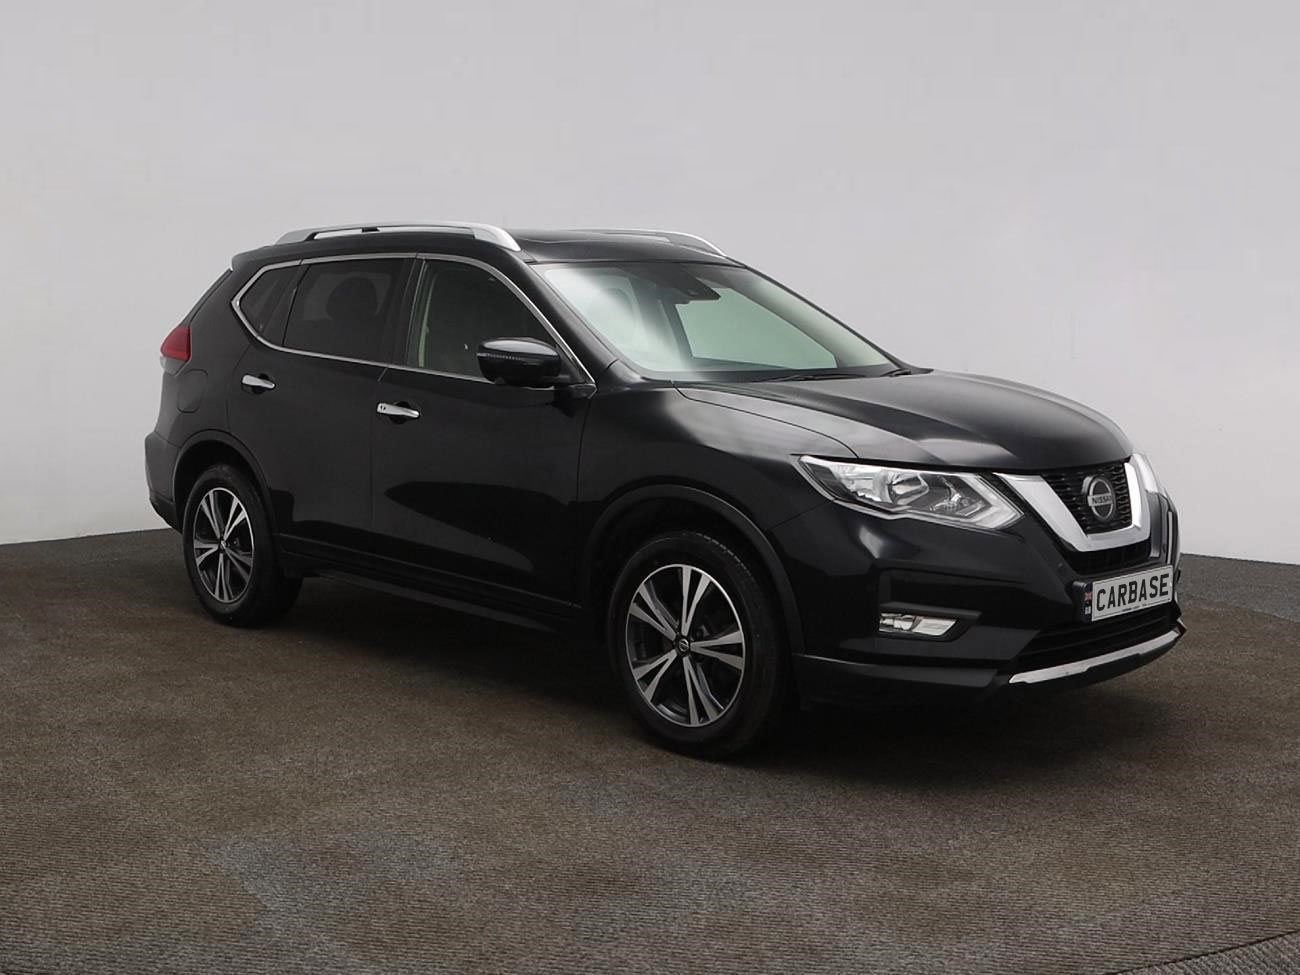 Side view of Nissan X-Trail in showroom